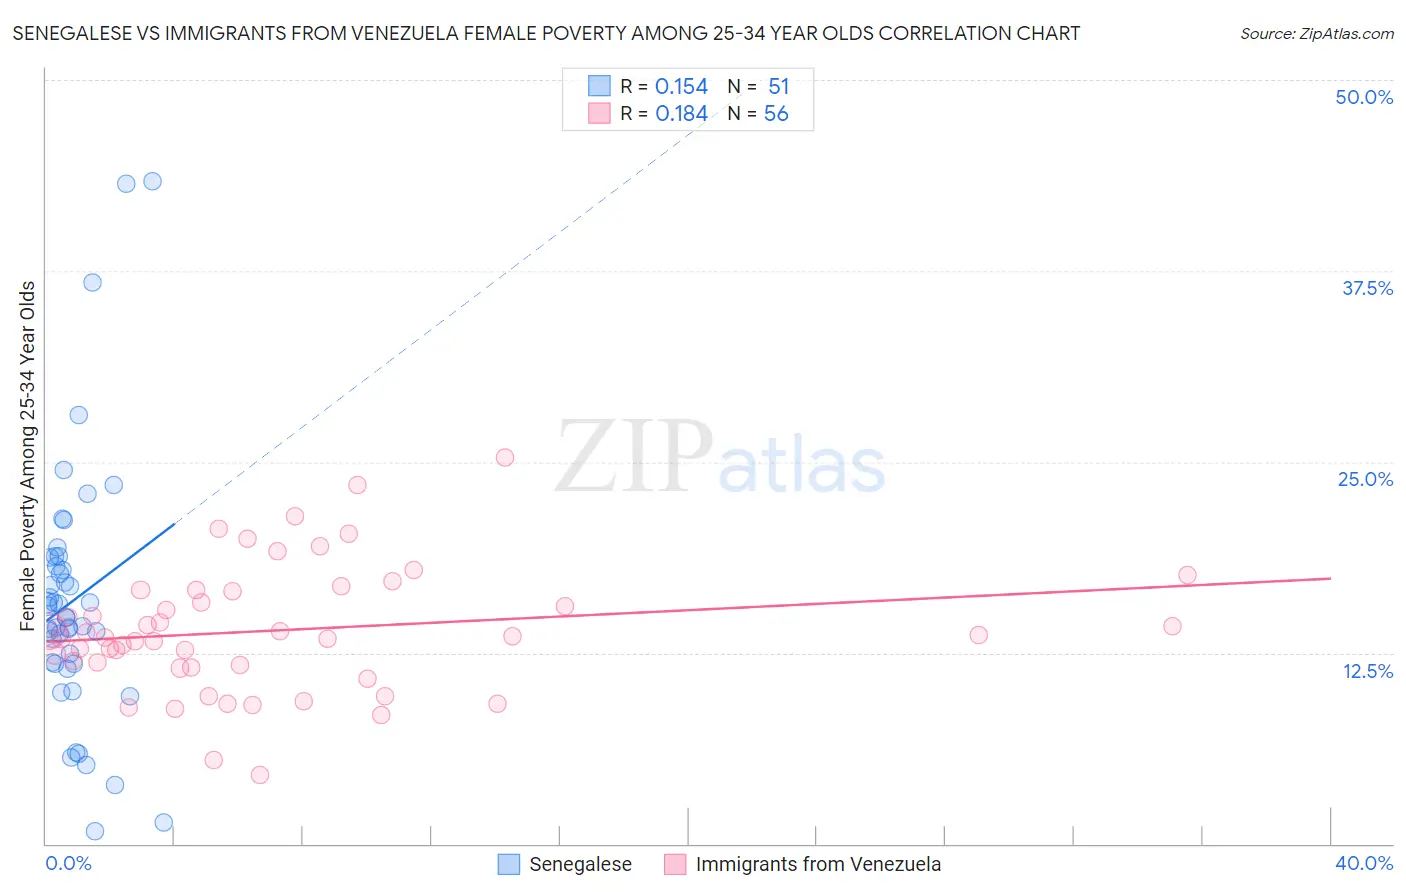 Senegalese vs Immigrants from Venezuela Female Poverty Among 25-34 Year Olds